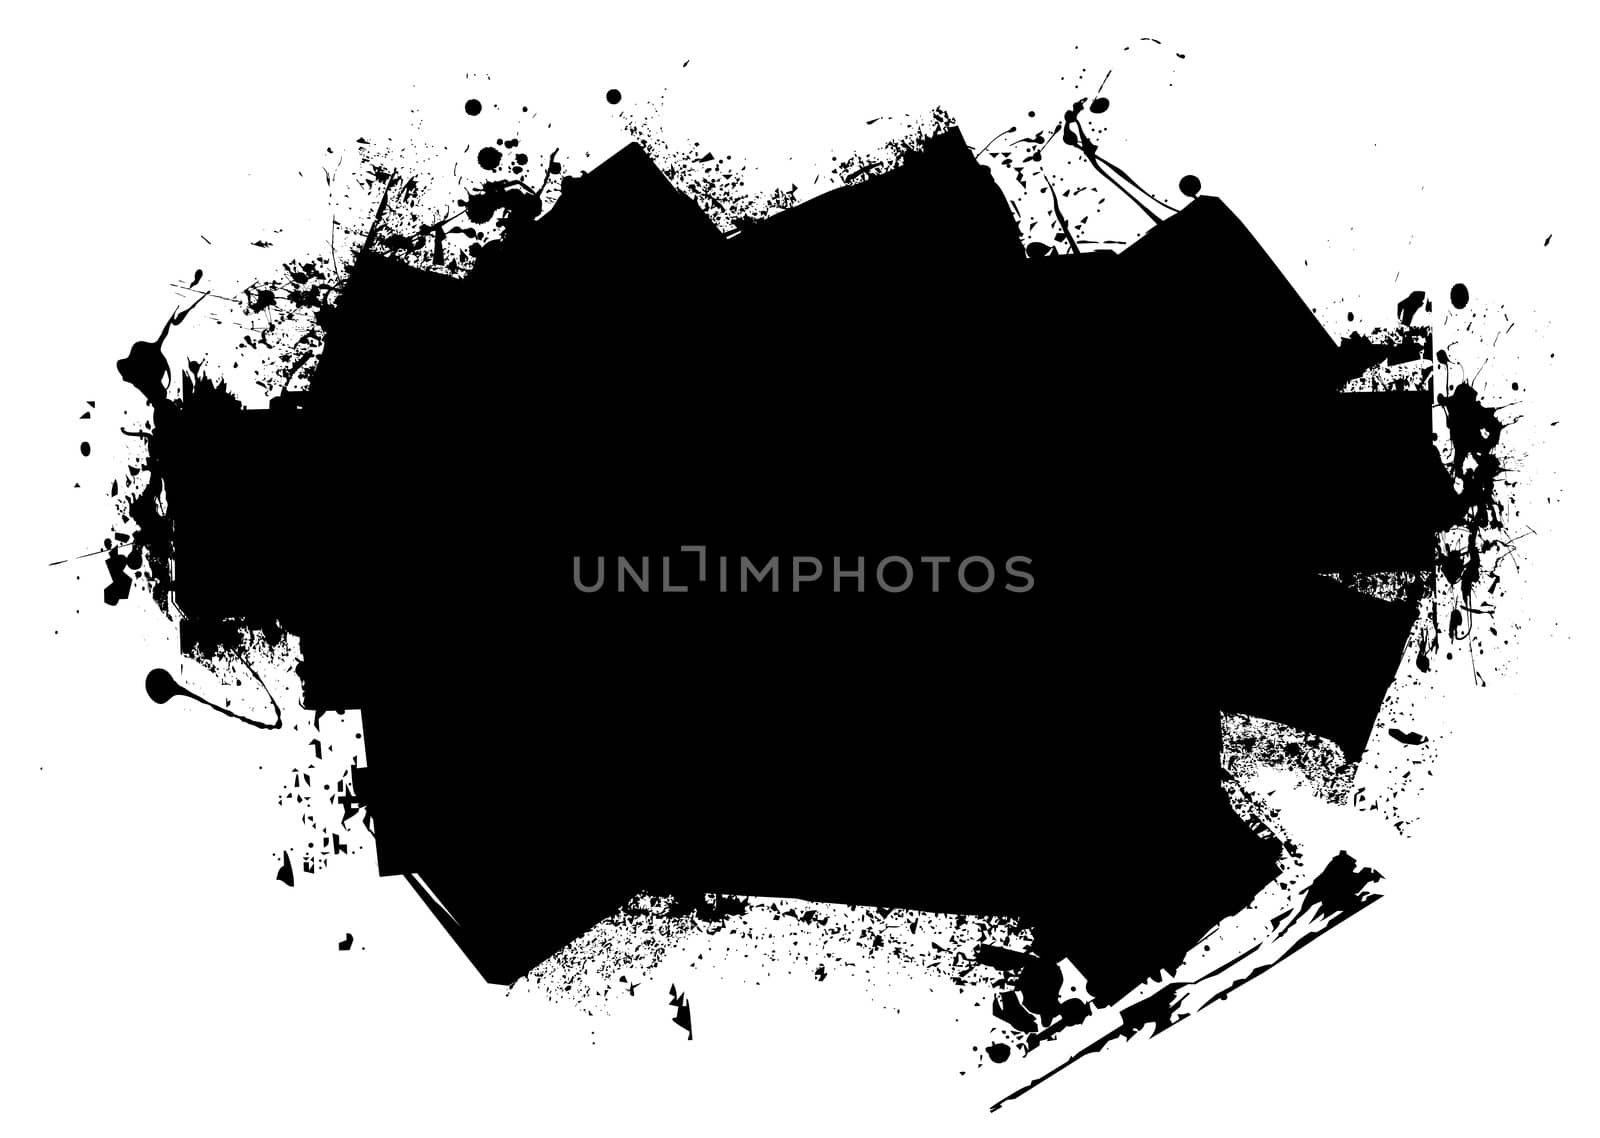 Grunge style black roller marks with ink splats and room for text